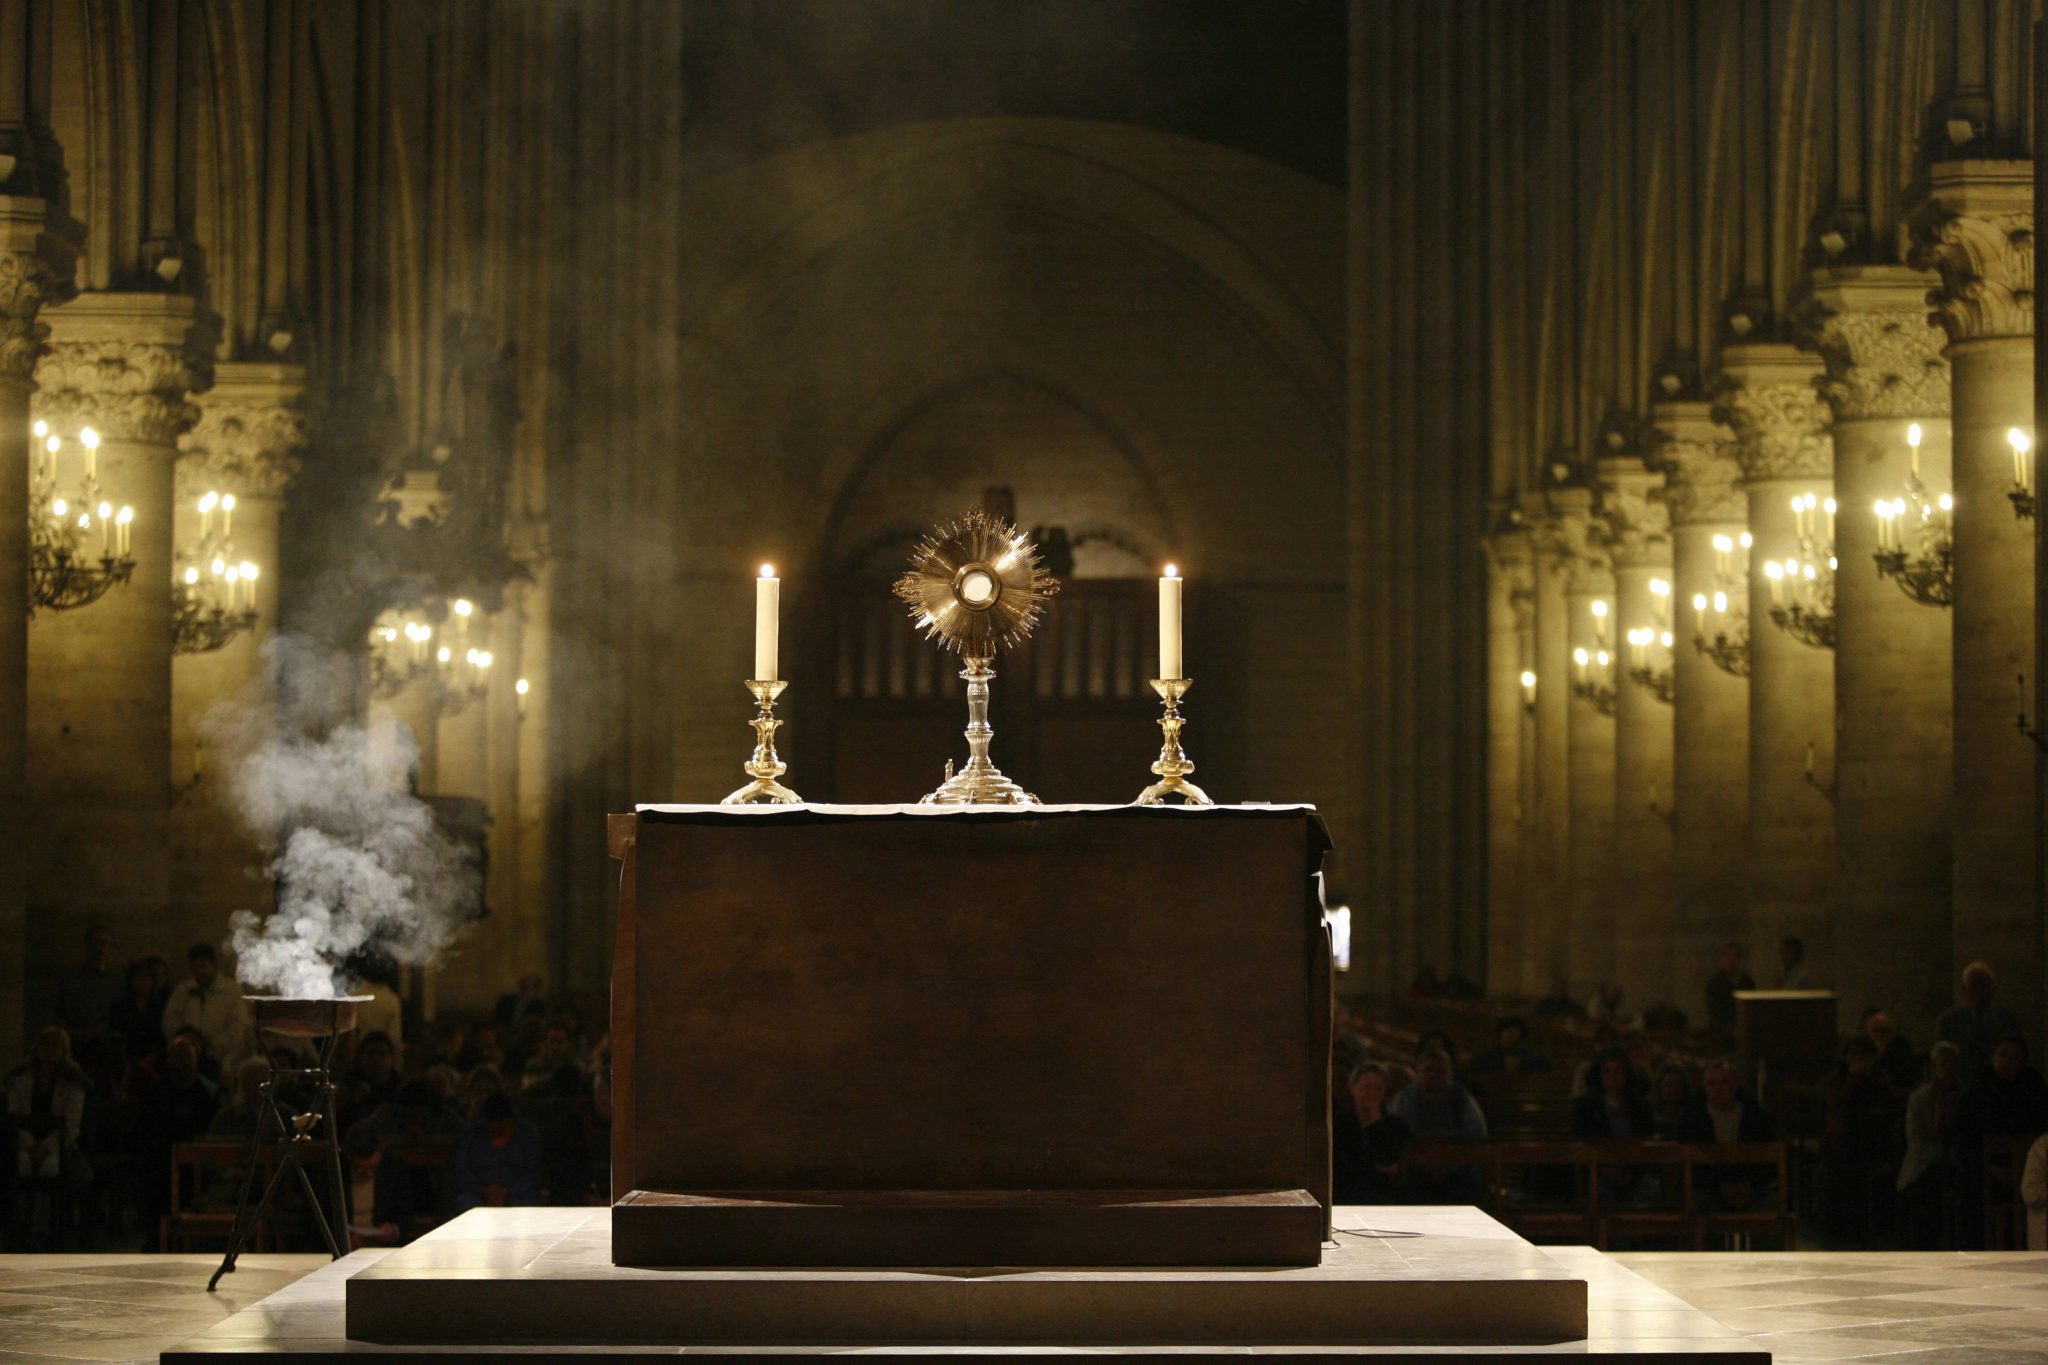 Holy sacrament in Paris cathedral, Paris, France, Europe